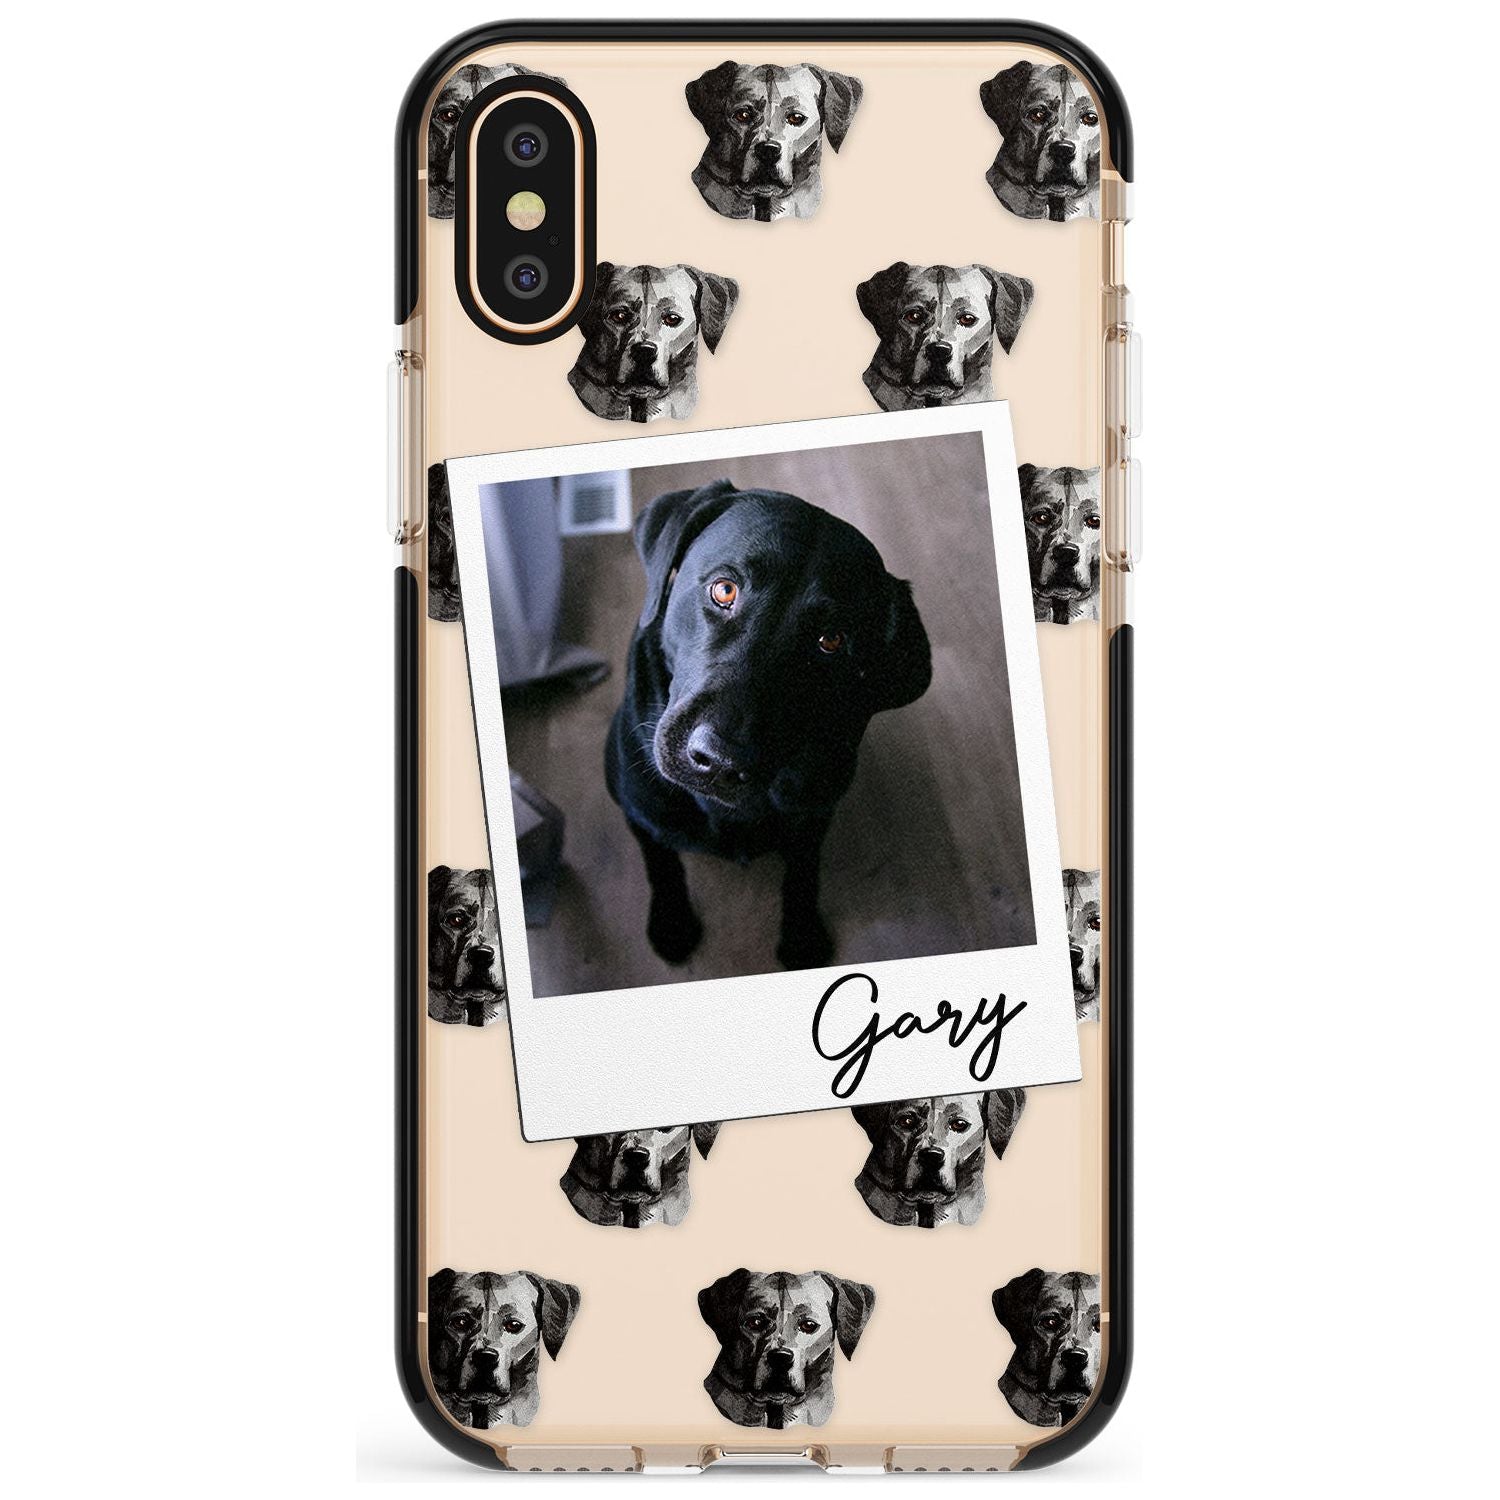 Labrador, Black - Custom Dog Photo Pink Fade Impact Phone Case for iPhone X XS Max XR